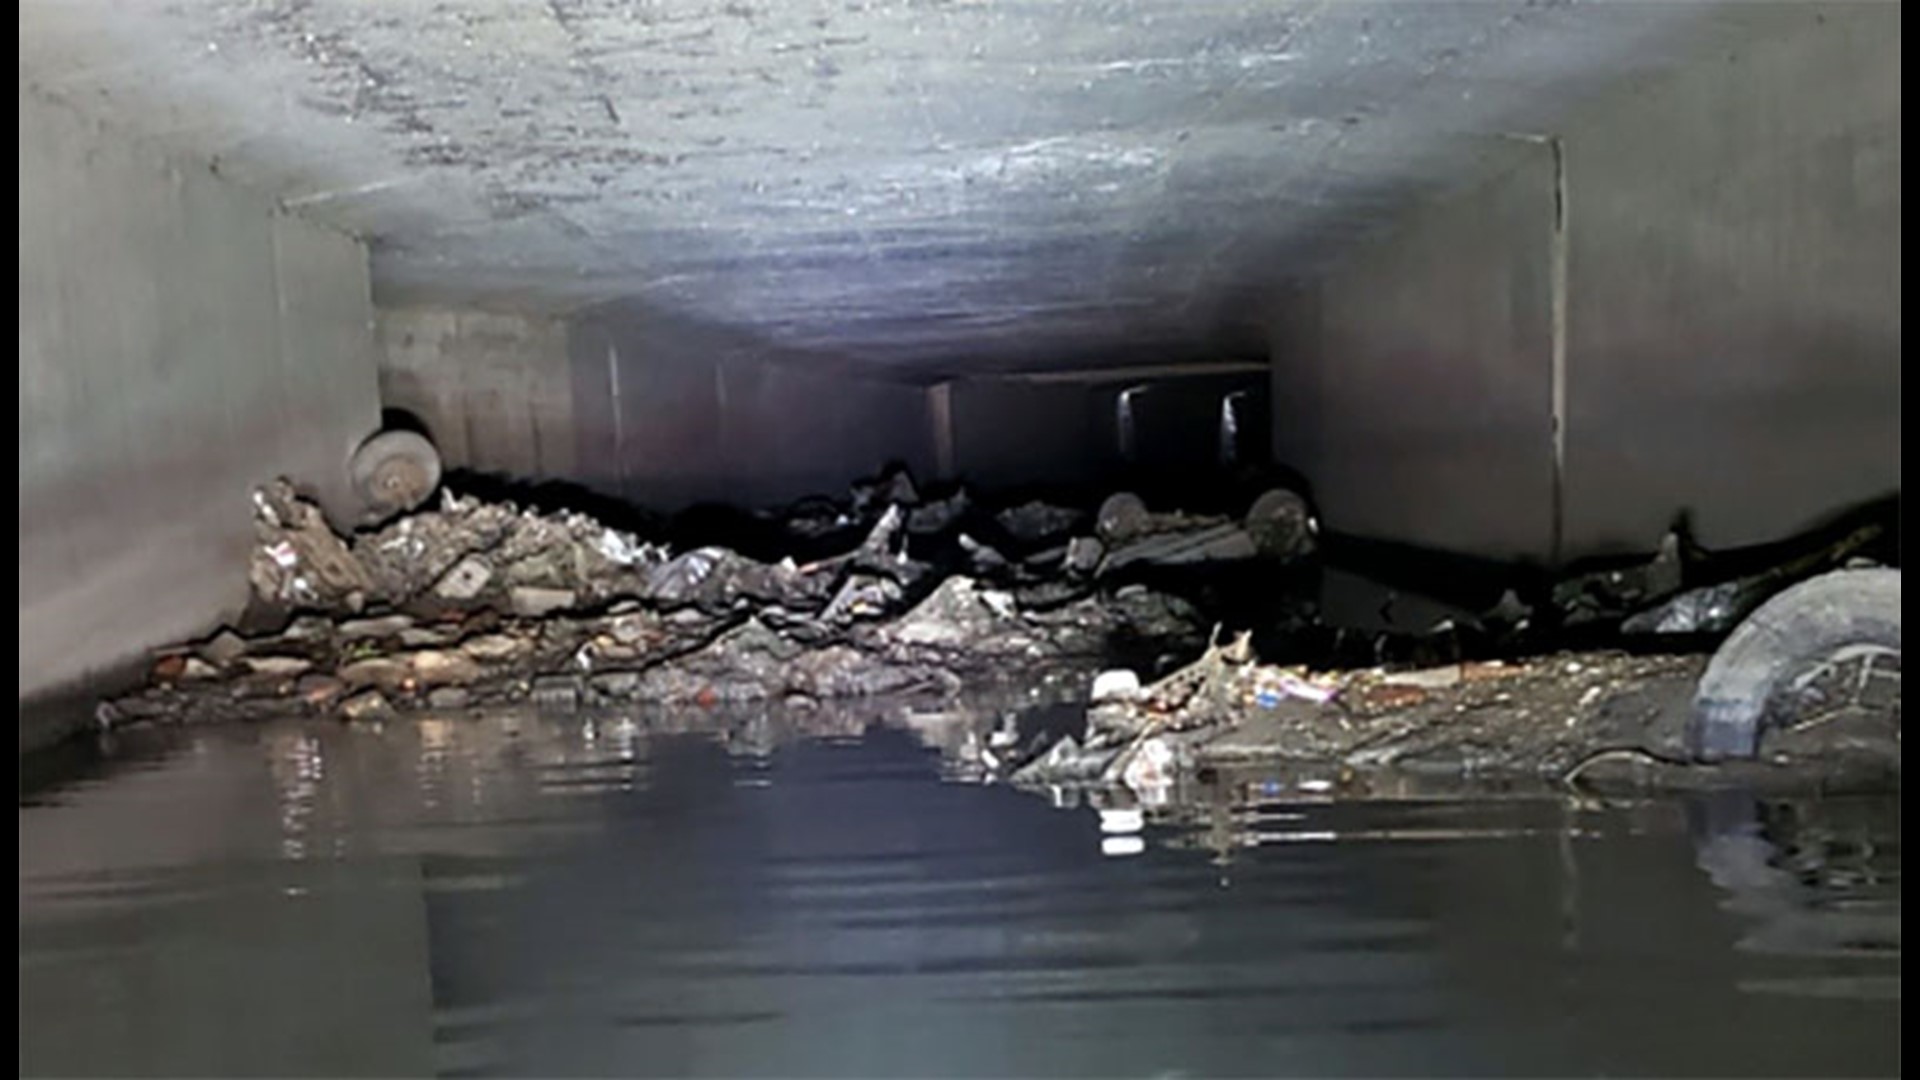 hAn inspection of an underground canal that overtopped during a July 10 flooding event showed an overturned car and other debris blocking the flow of water, according to the New Orleans Sewerage & Water Board.